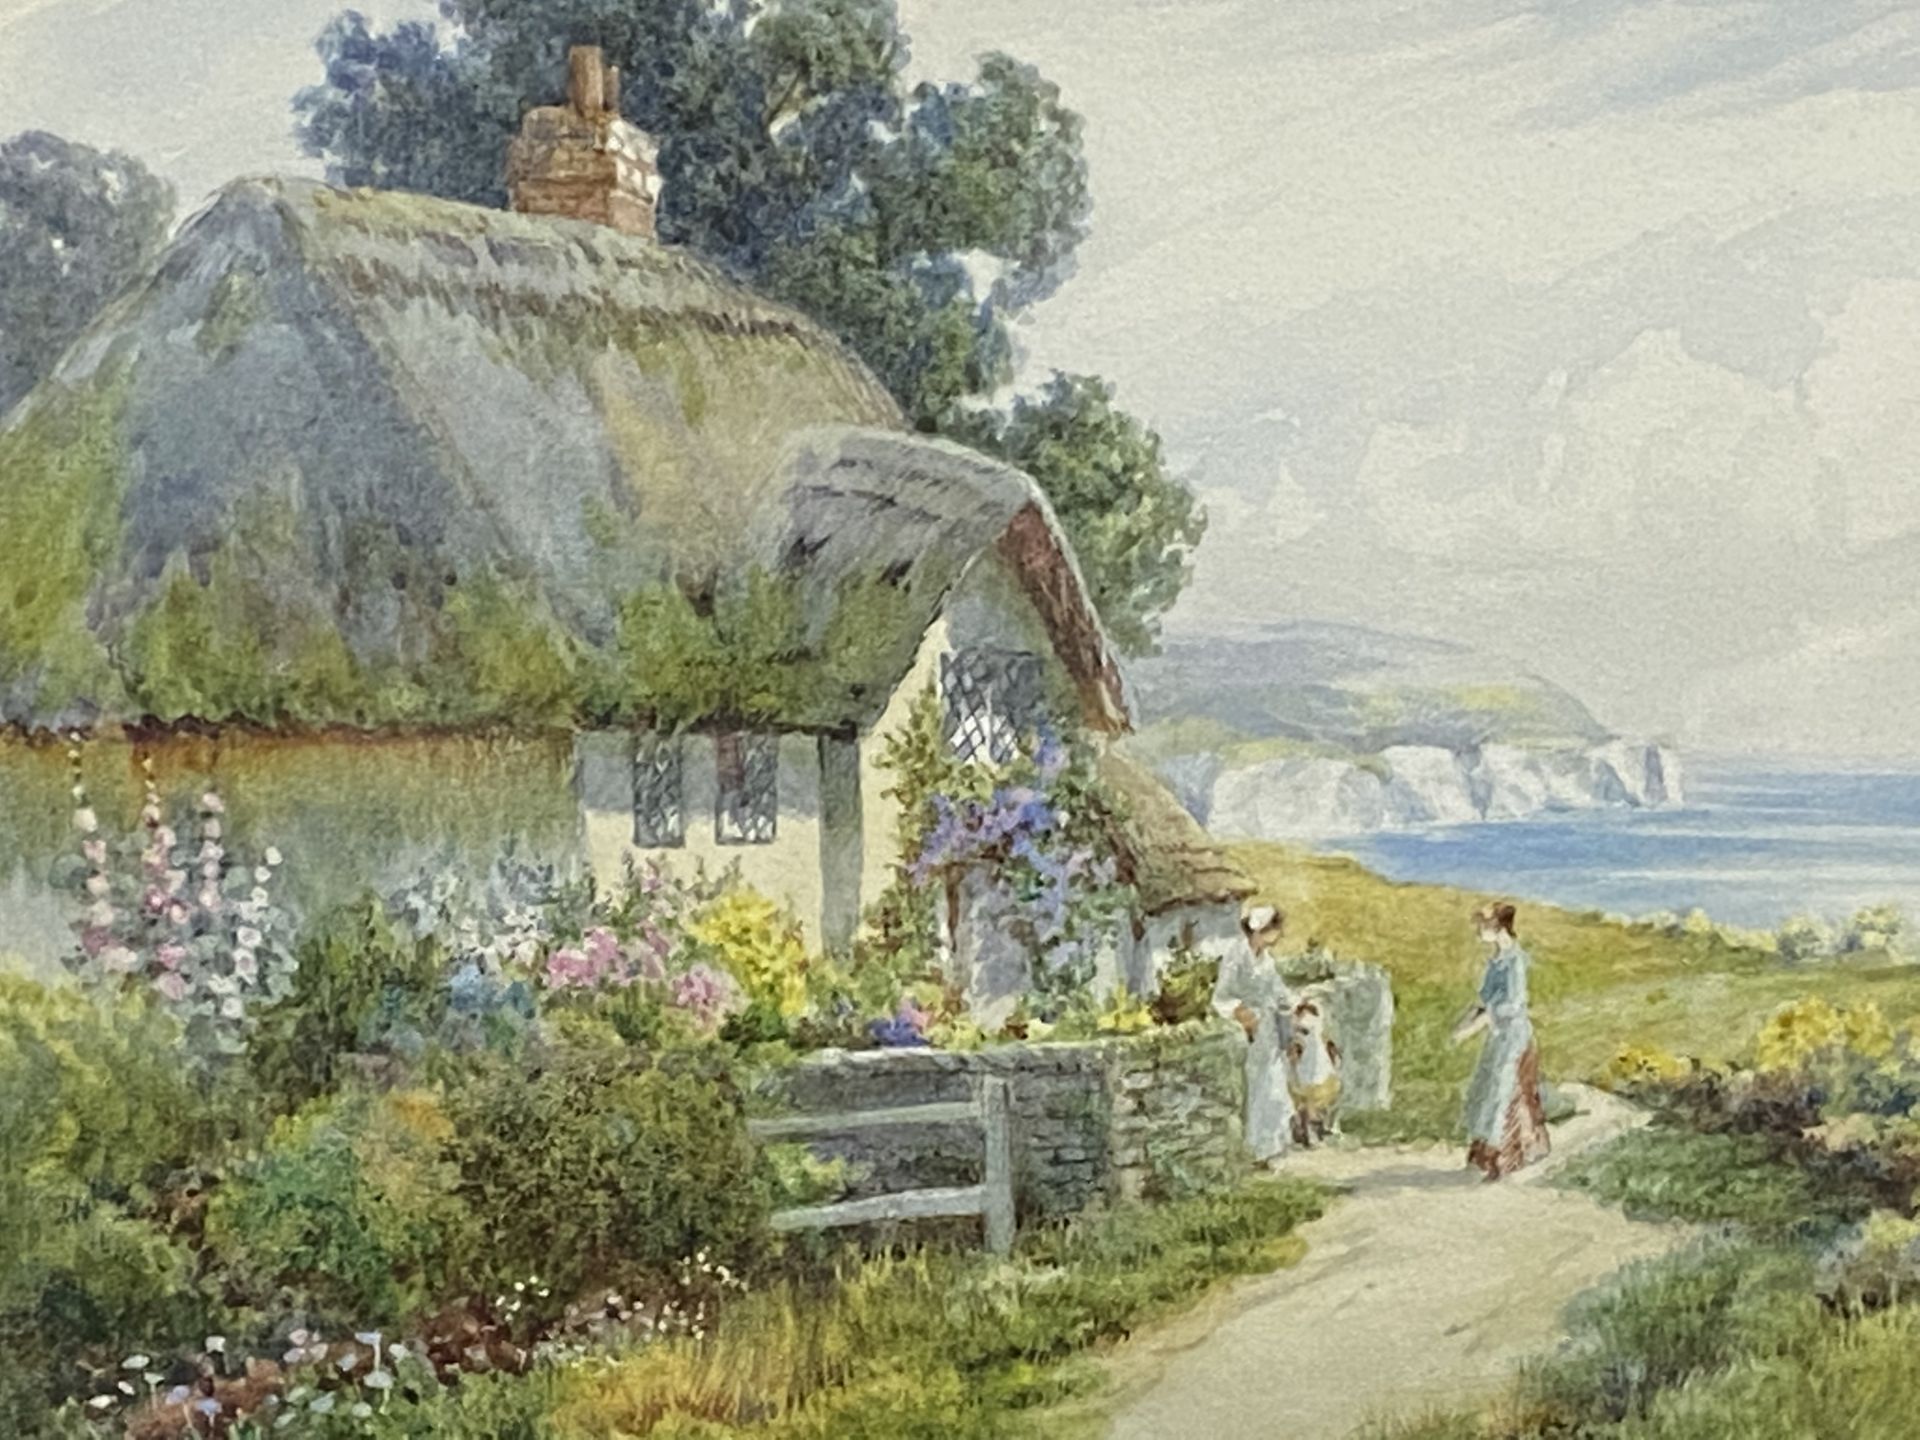 Framed and glazed watercolour of a cottage